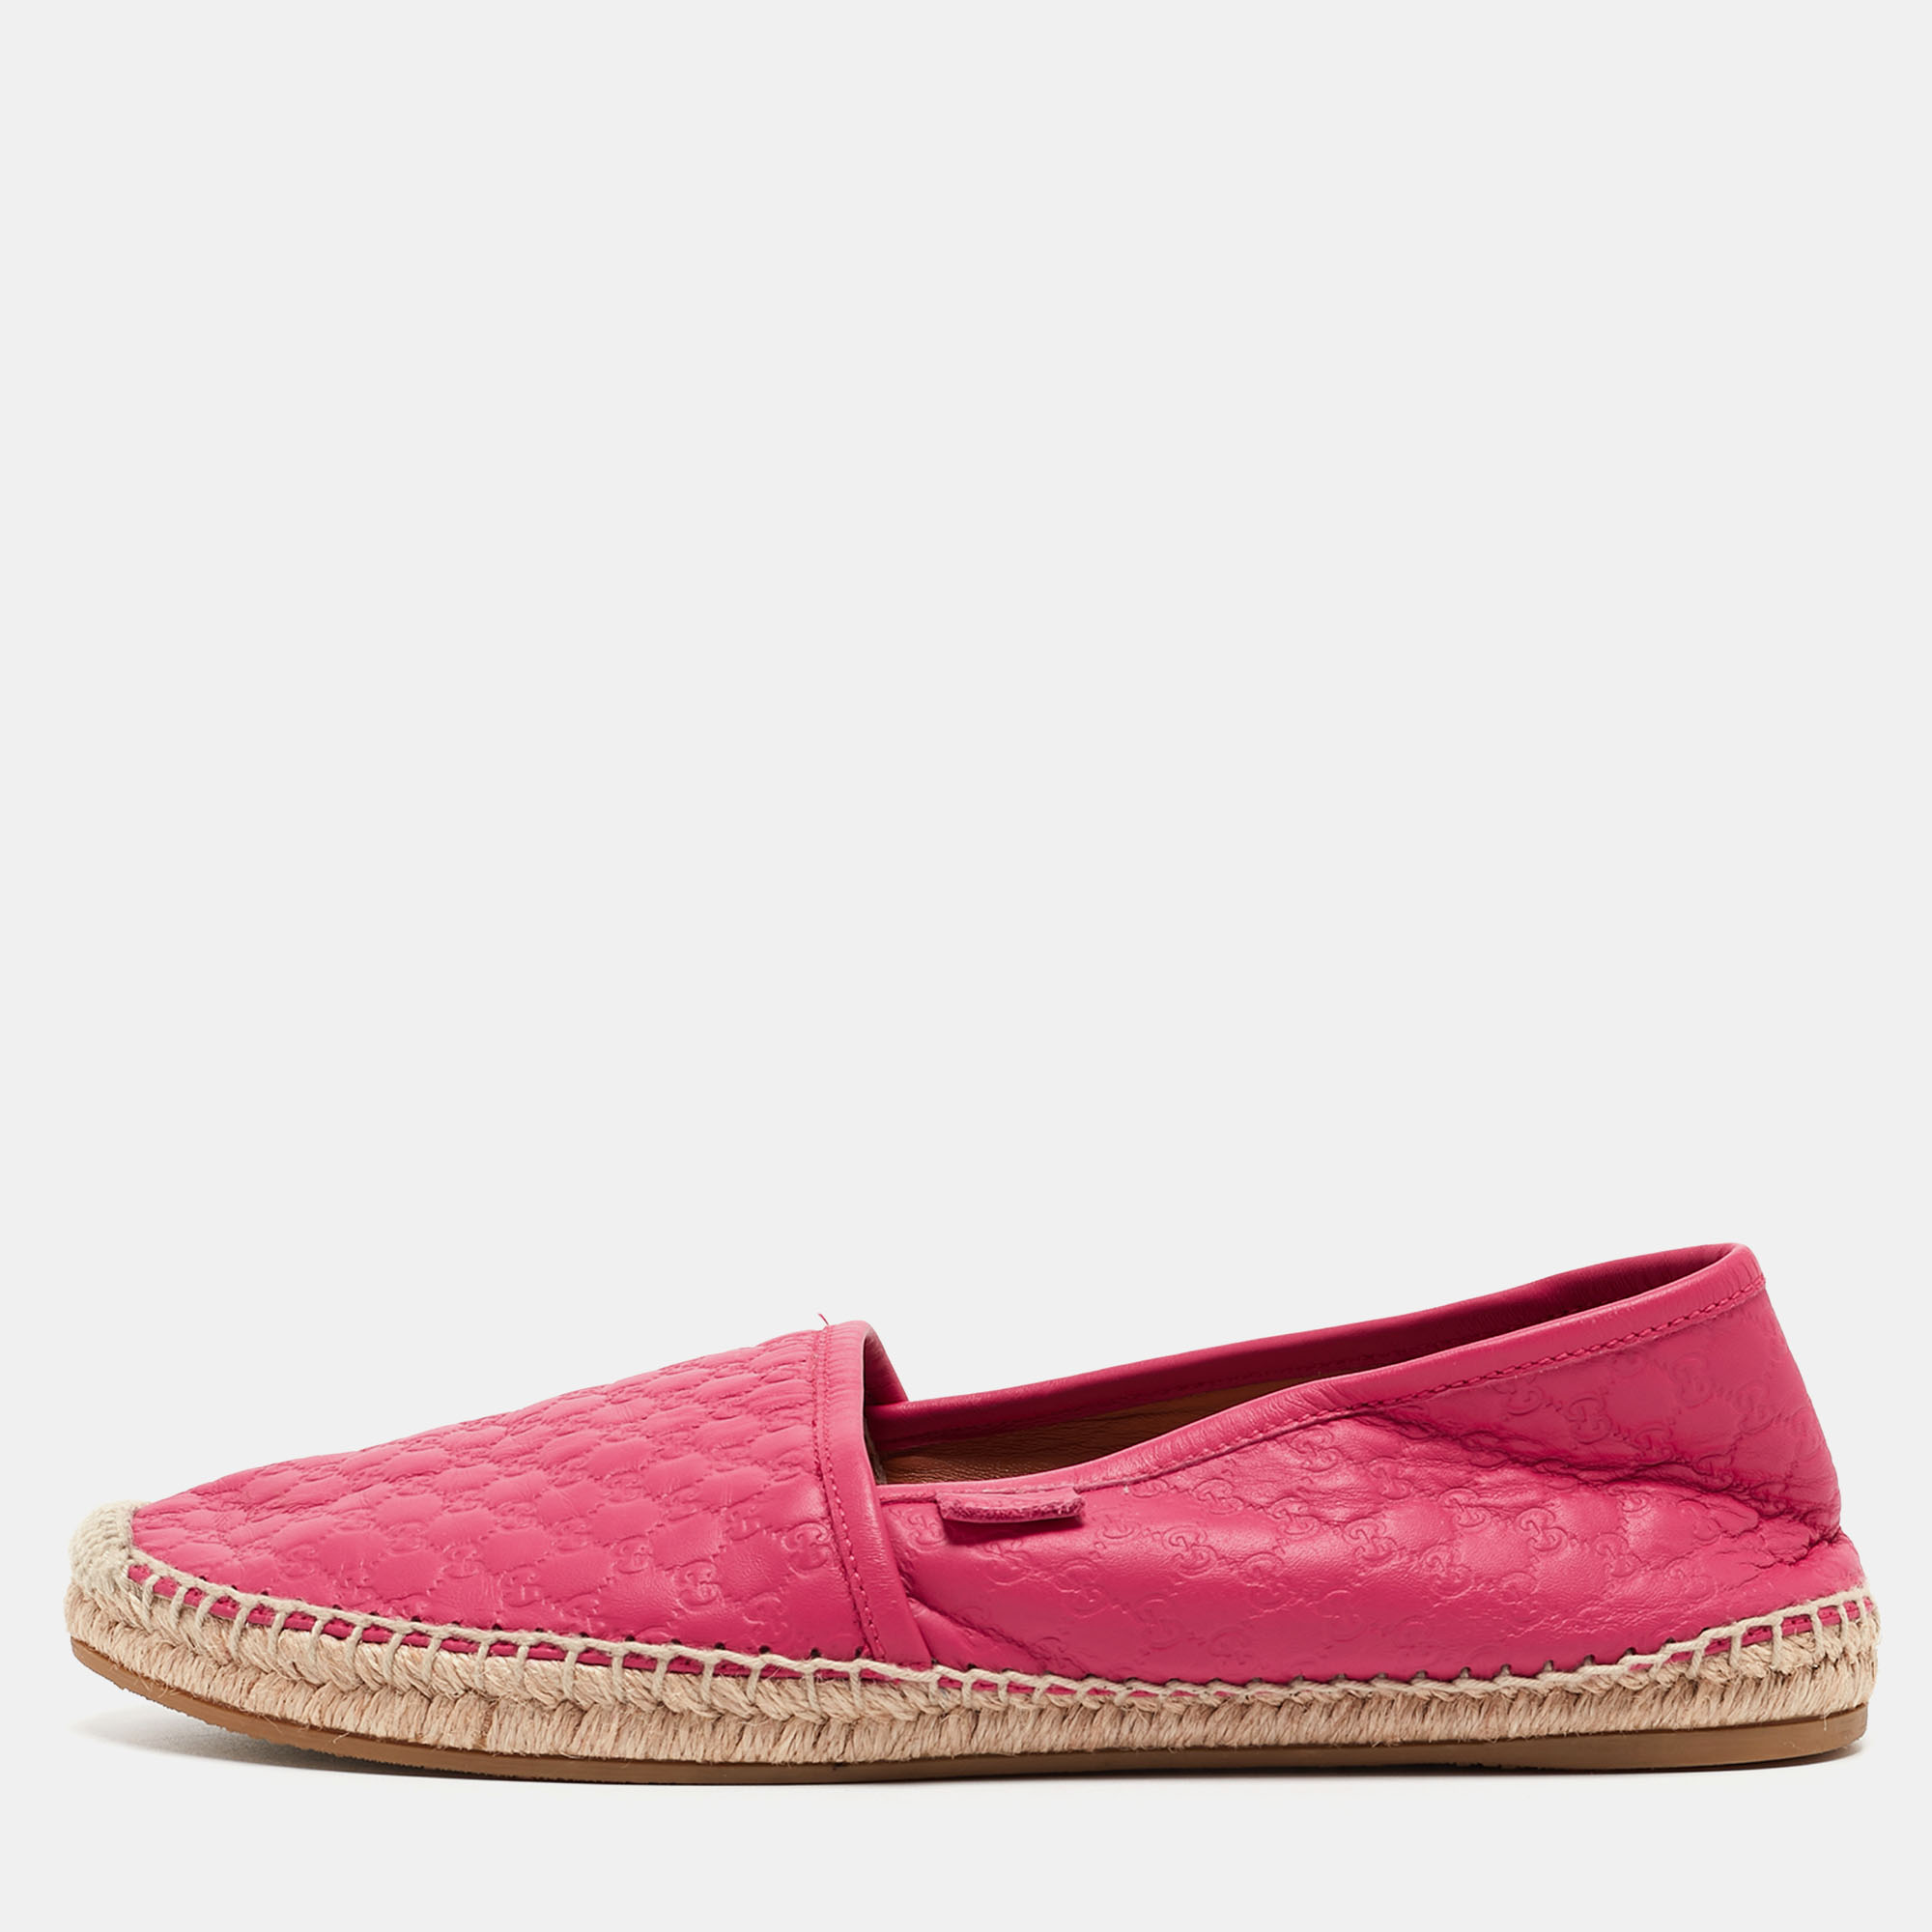 Pre-owned Gucci Pink Microssima Leather Espadrille Flats Size 39.5